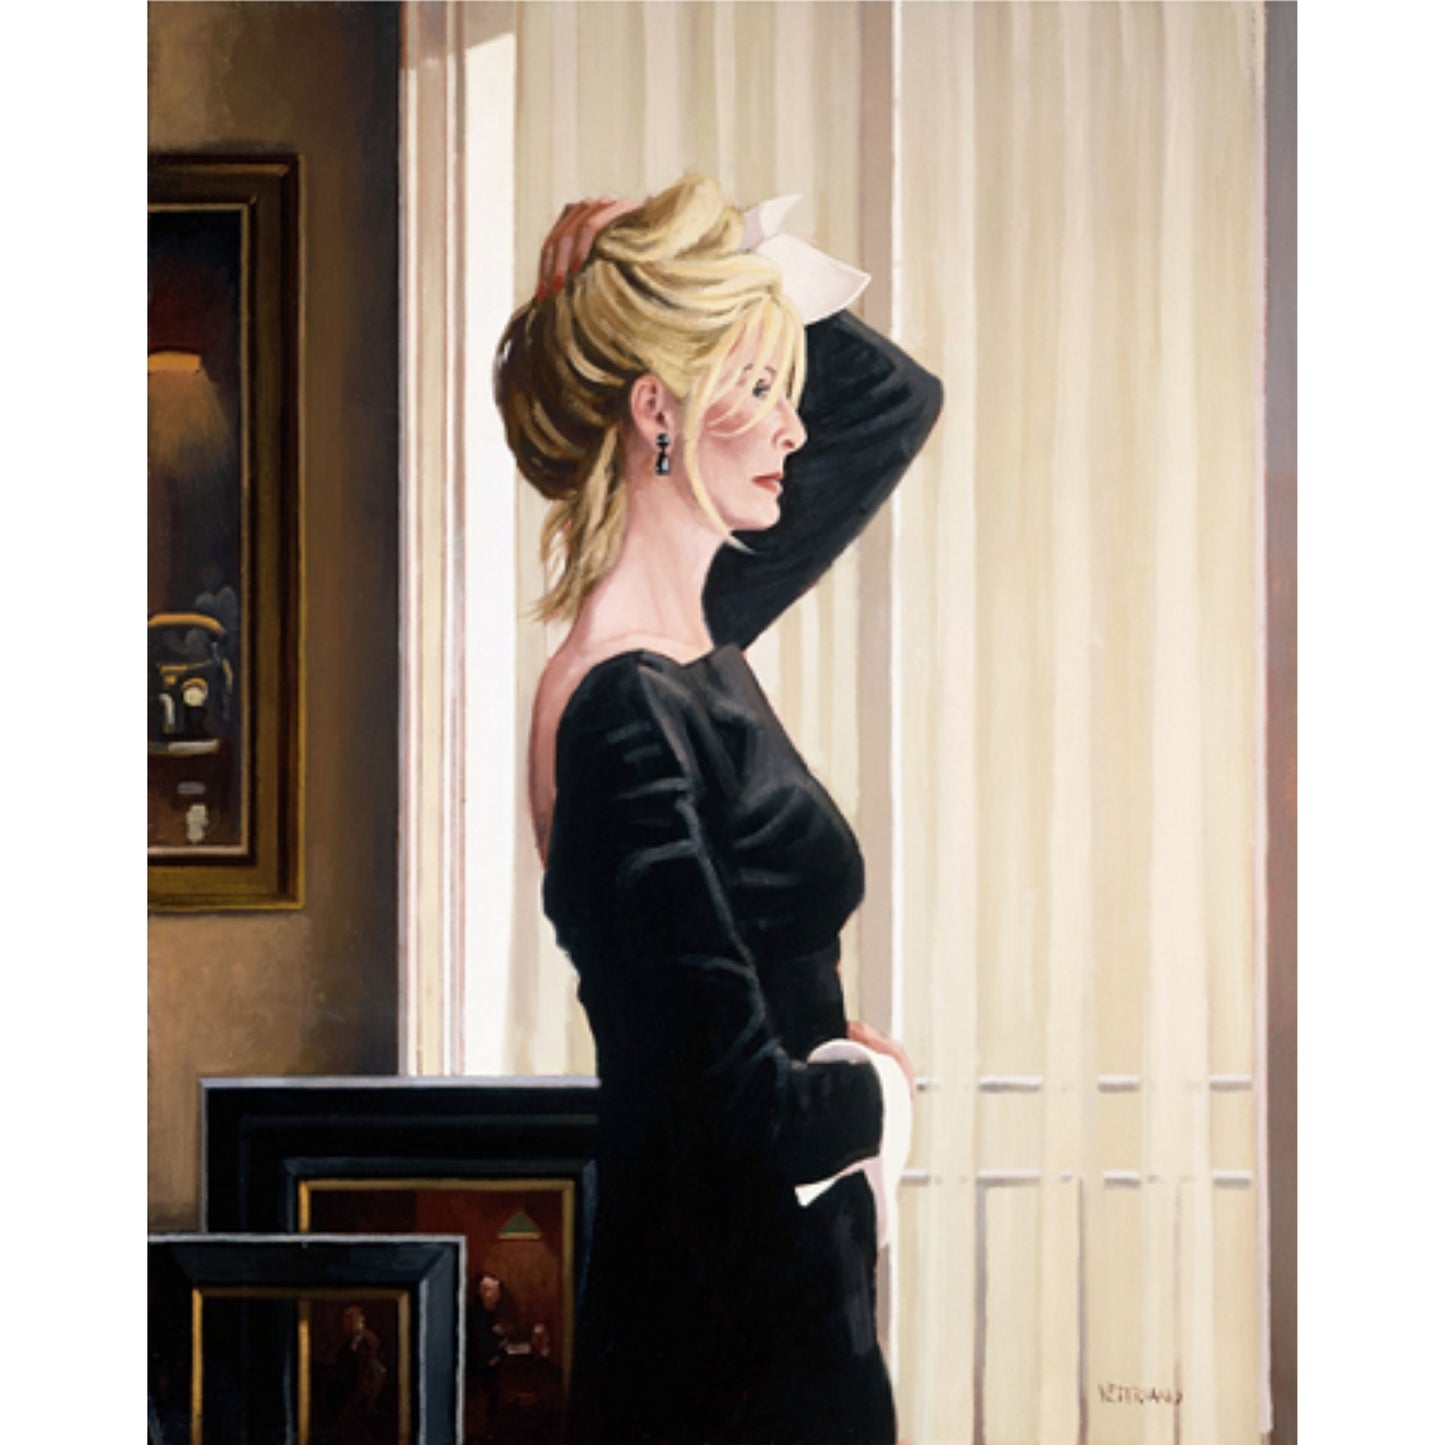 Load image into Gallery viewer, Black on Blonde The Contemplation Series Jack Vettriano
